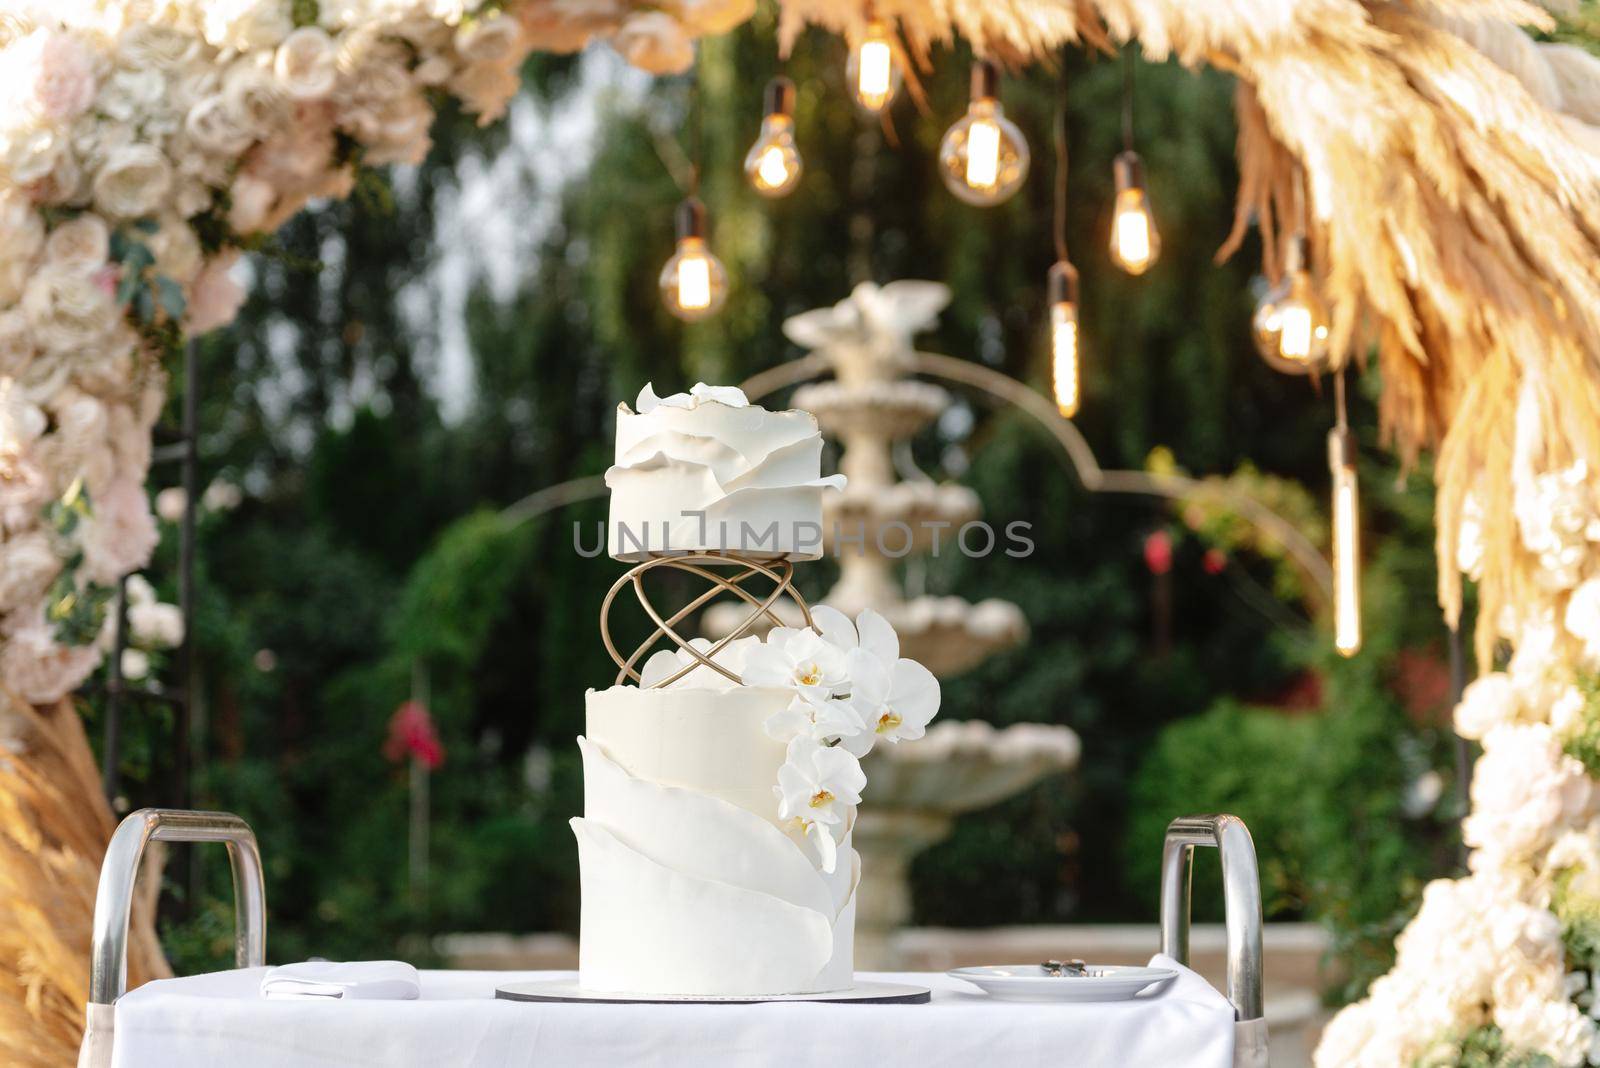 Wedding cake on the background of the wedding arch